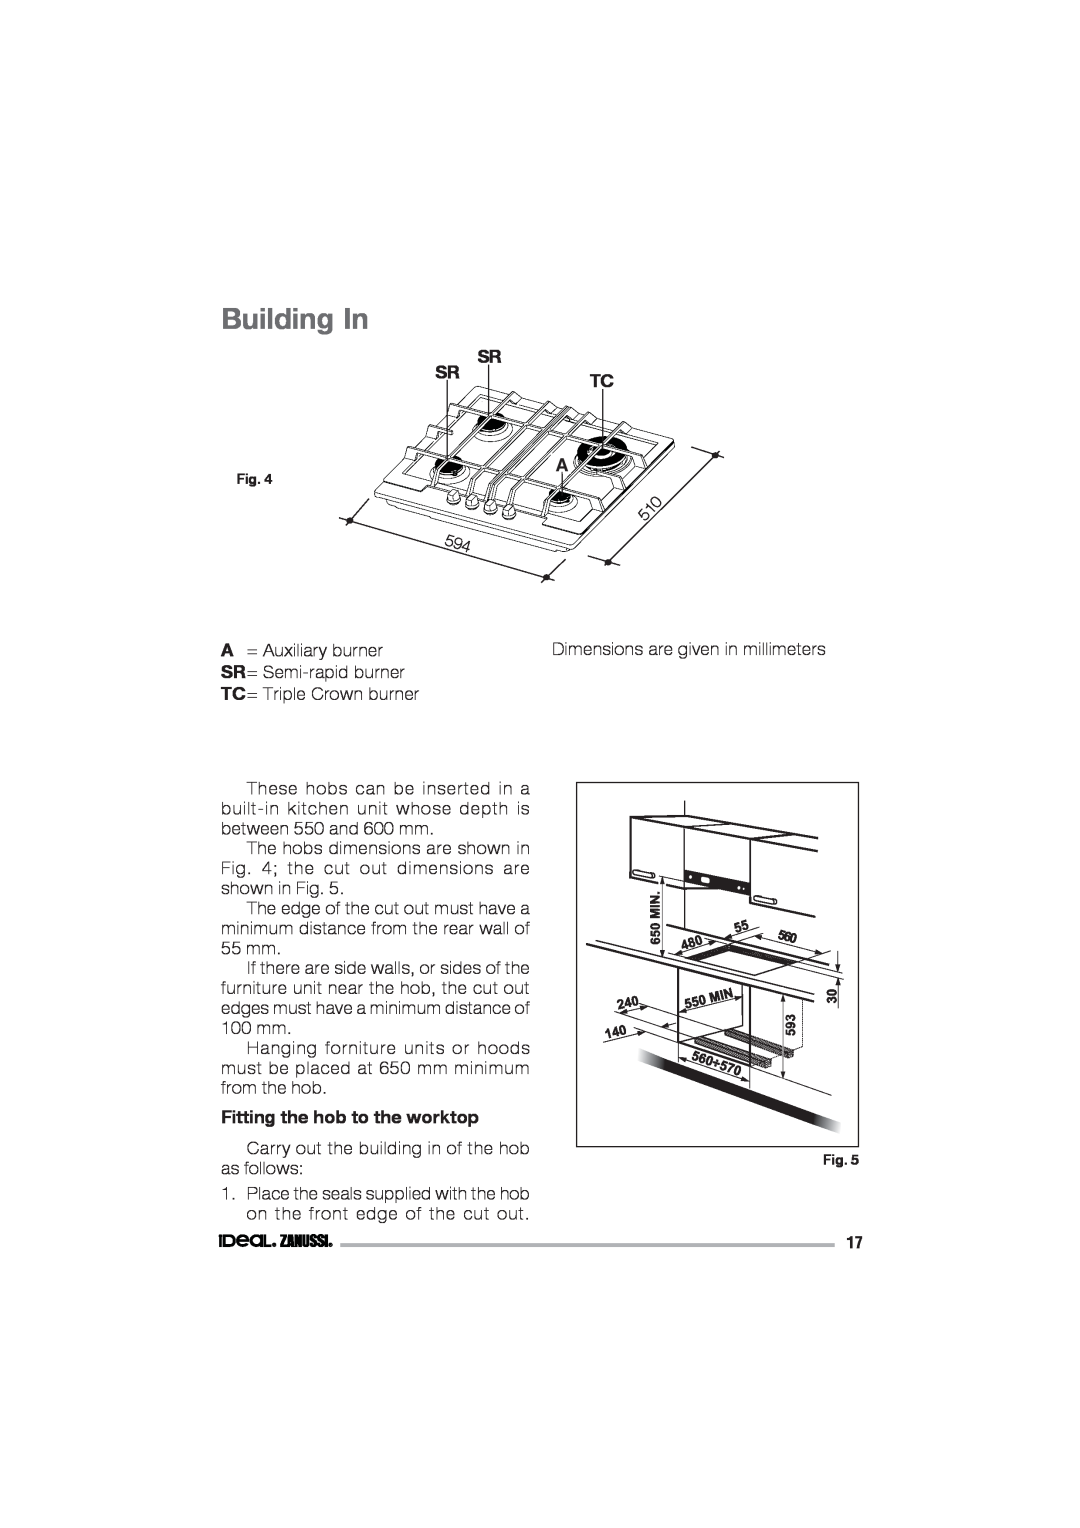 IDEAL INDUSTRIES IZGS 68 ICTX manual Building In, Sr Sr Tc, Fitting the hob to the worktop 